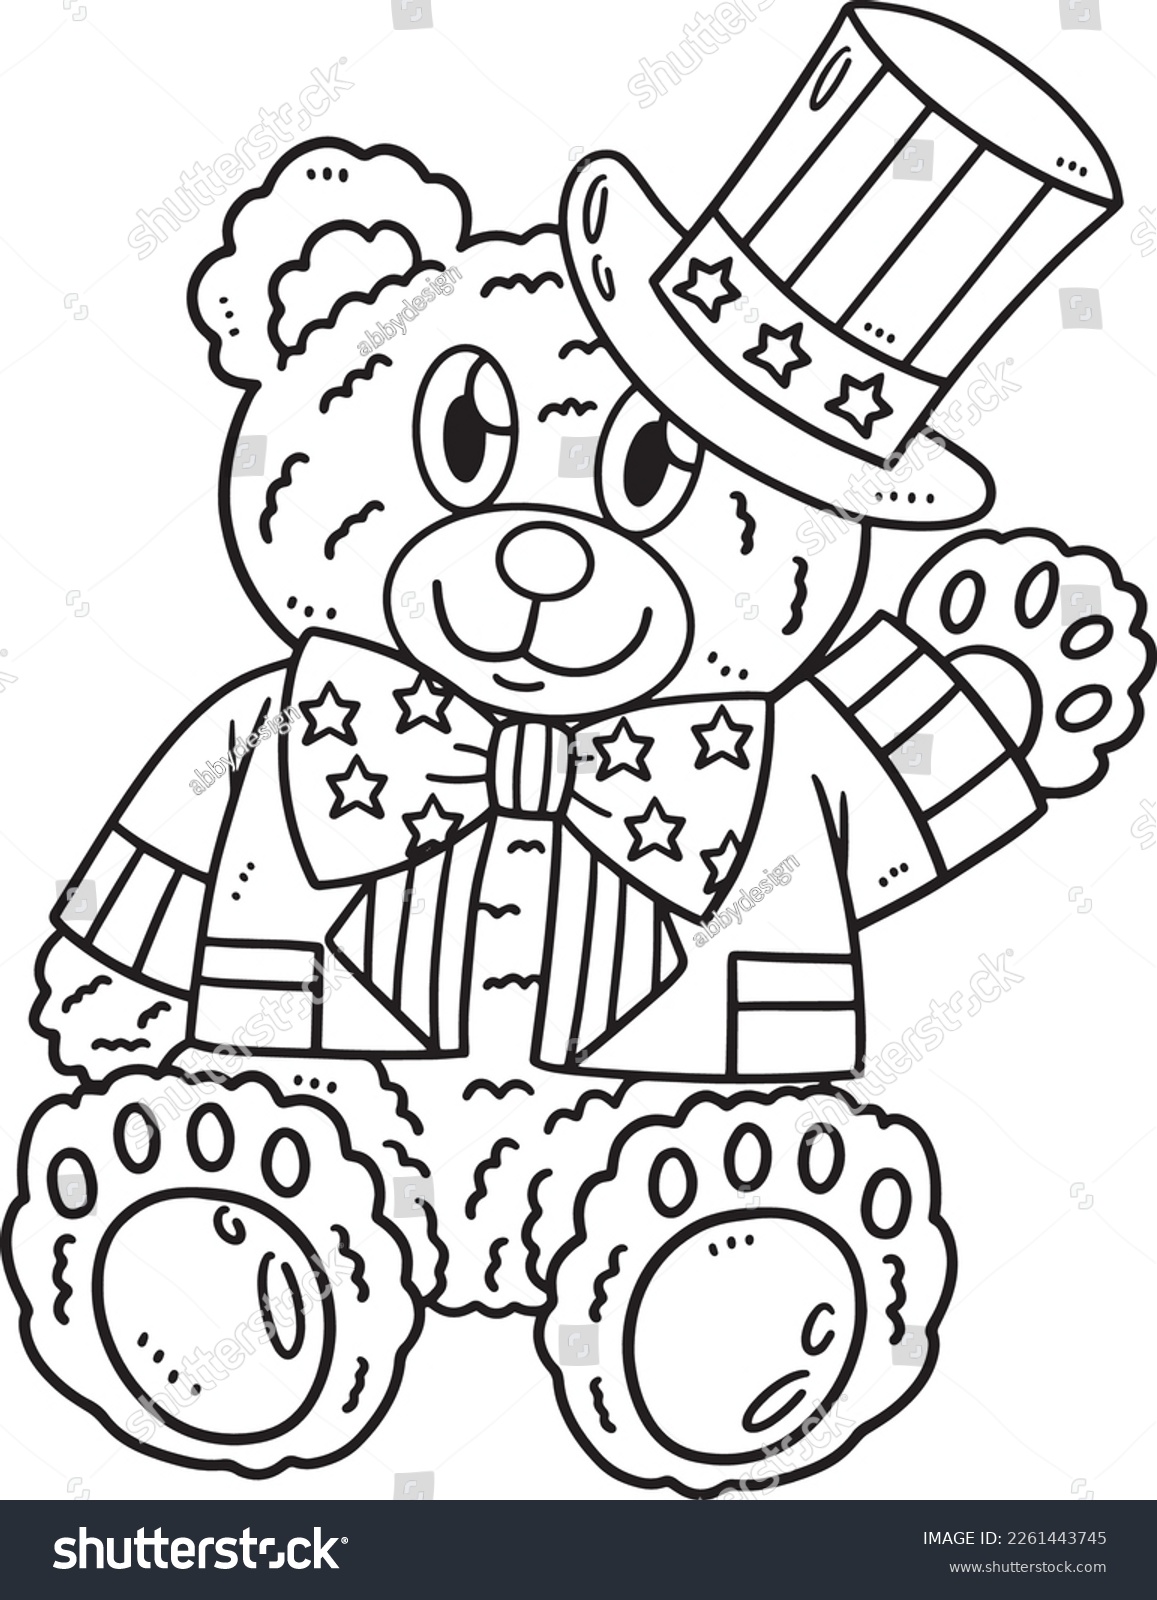 Hundred coloring pages th july royalty